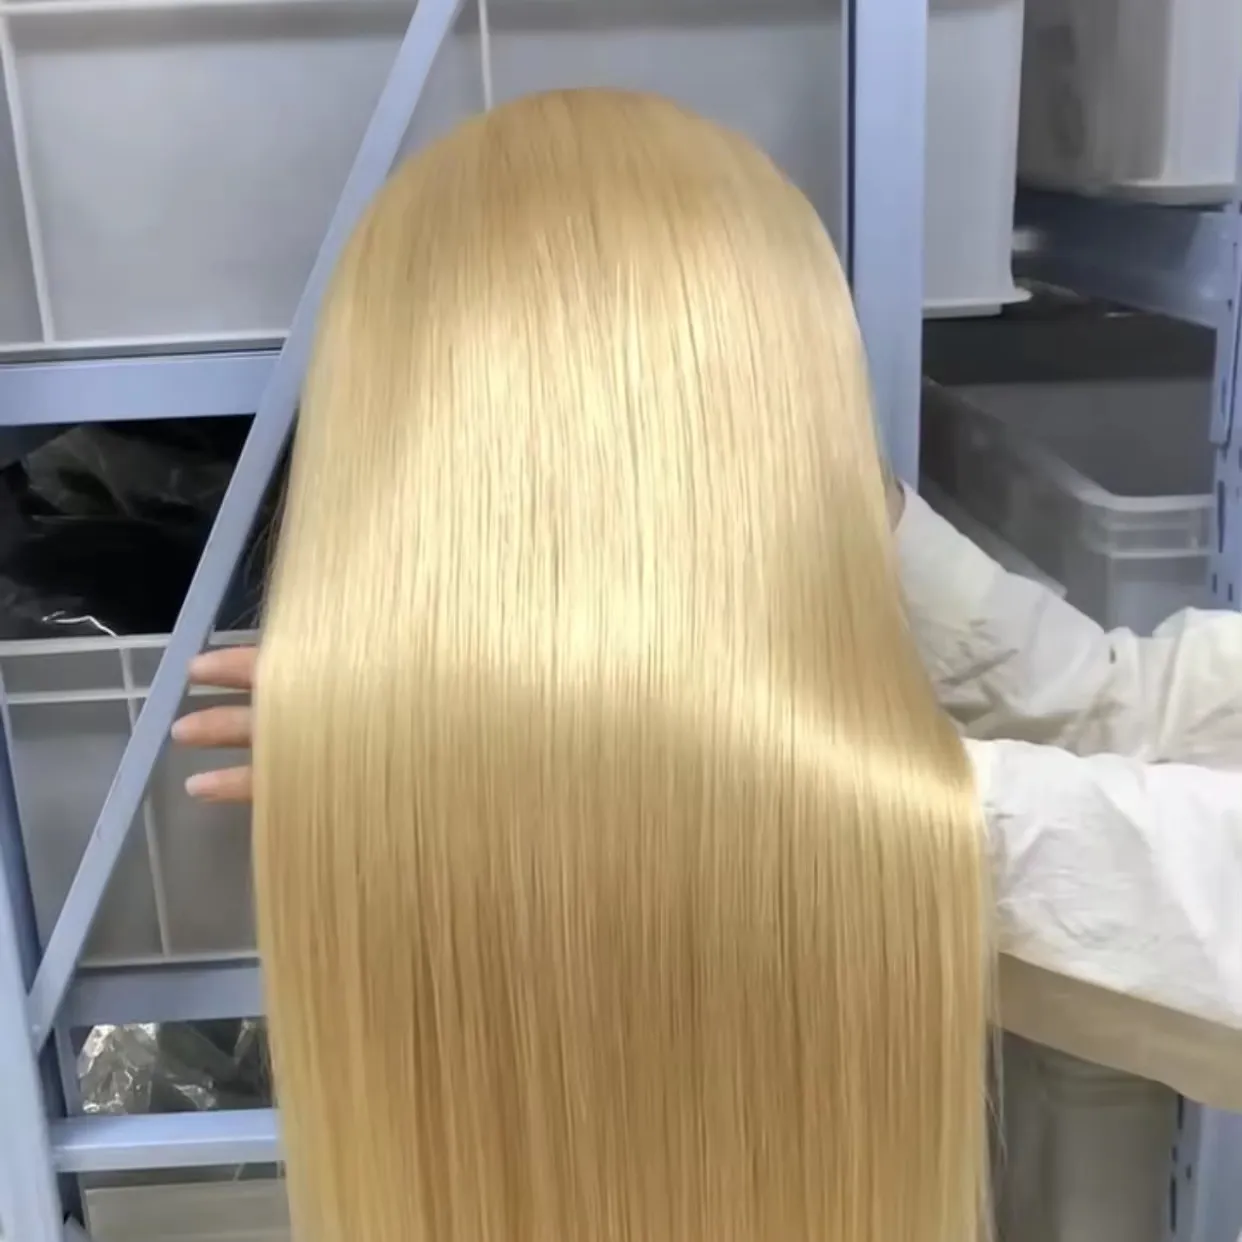 high quality wholesale blonde human hair 613 bundles with closure hair extension in stock fast shipping with good service